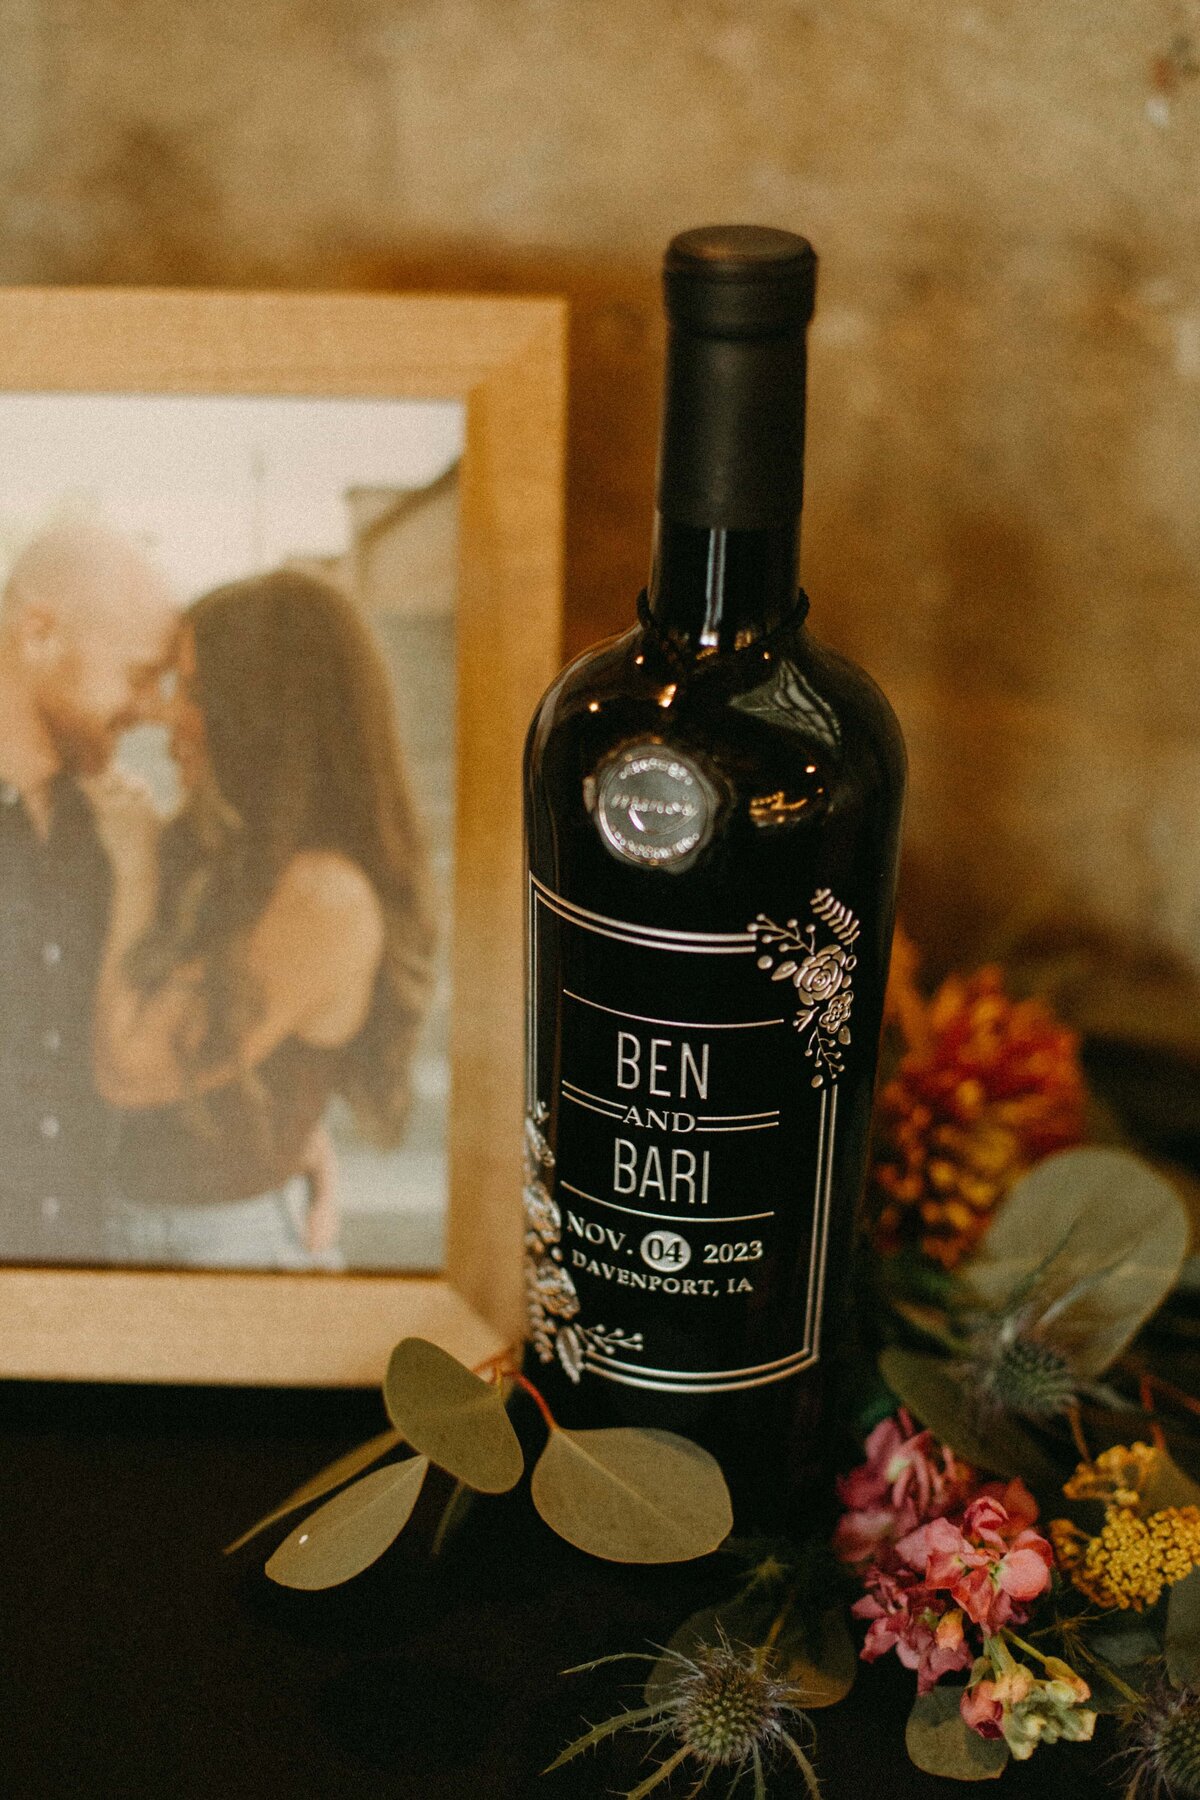 A custom-labeled wine bottle with "Ben and Bari Nov. 04, 2023" from Park Farm Winery, next to a framed photo of a couple kissing and a bouquet of